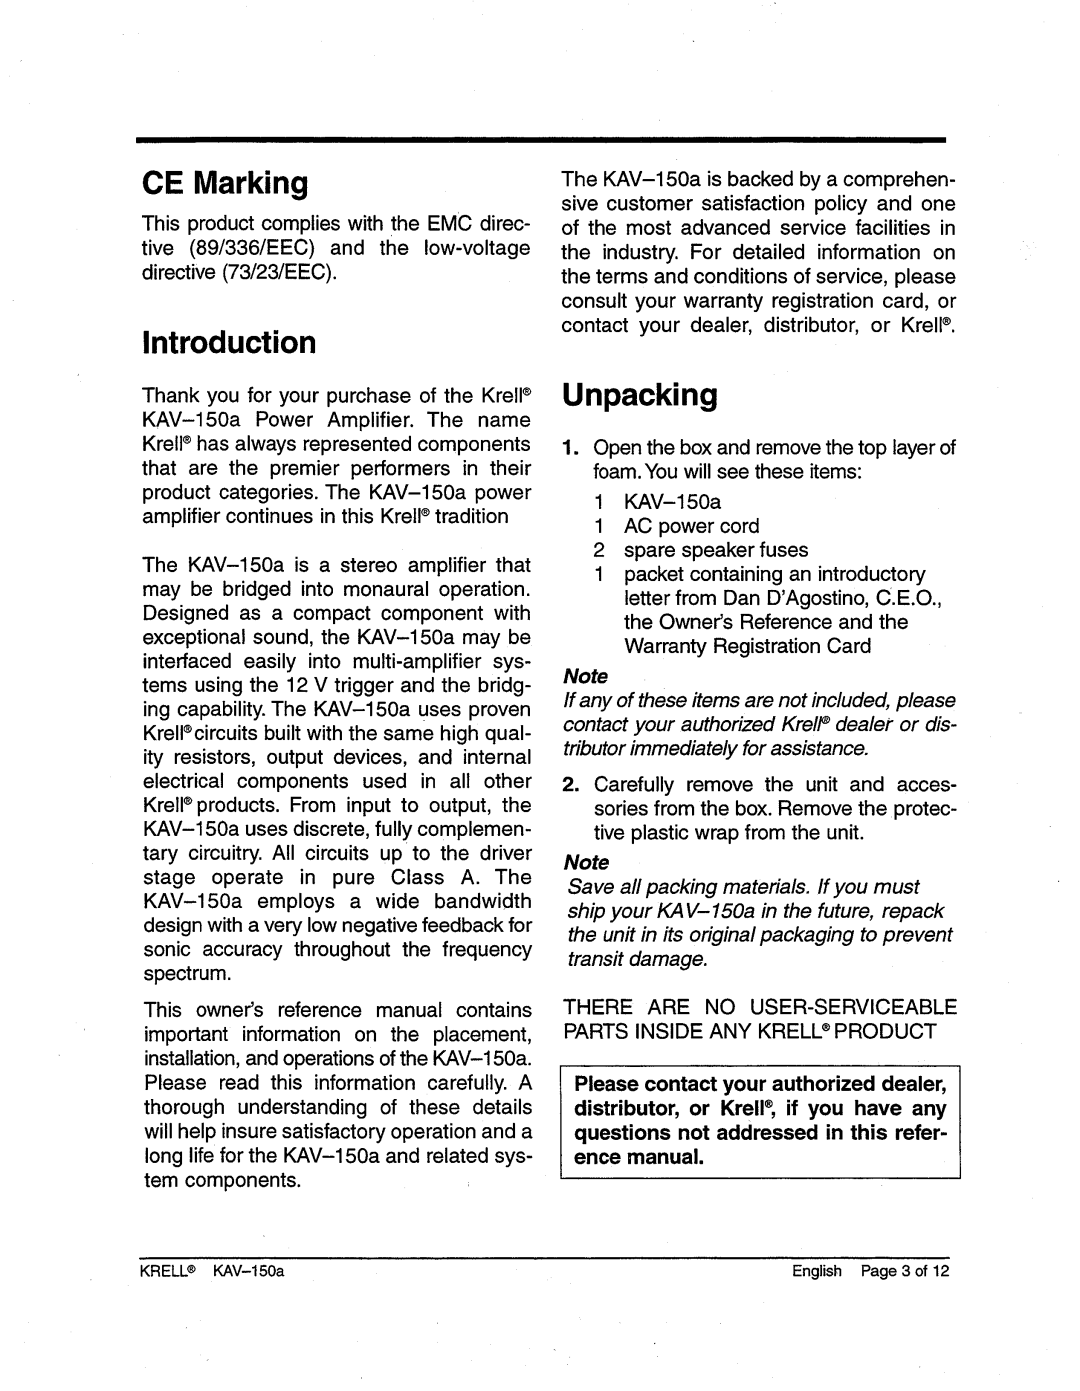 Krell Industries KAV-150a manual CE Marking, Introduction, Unpacking 